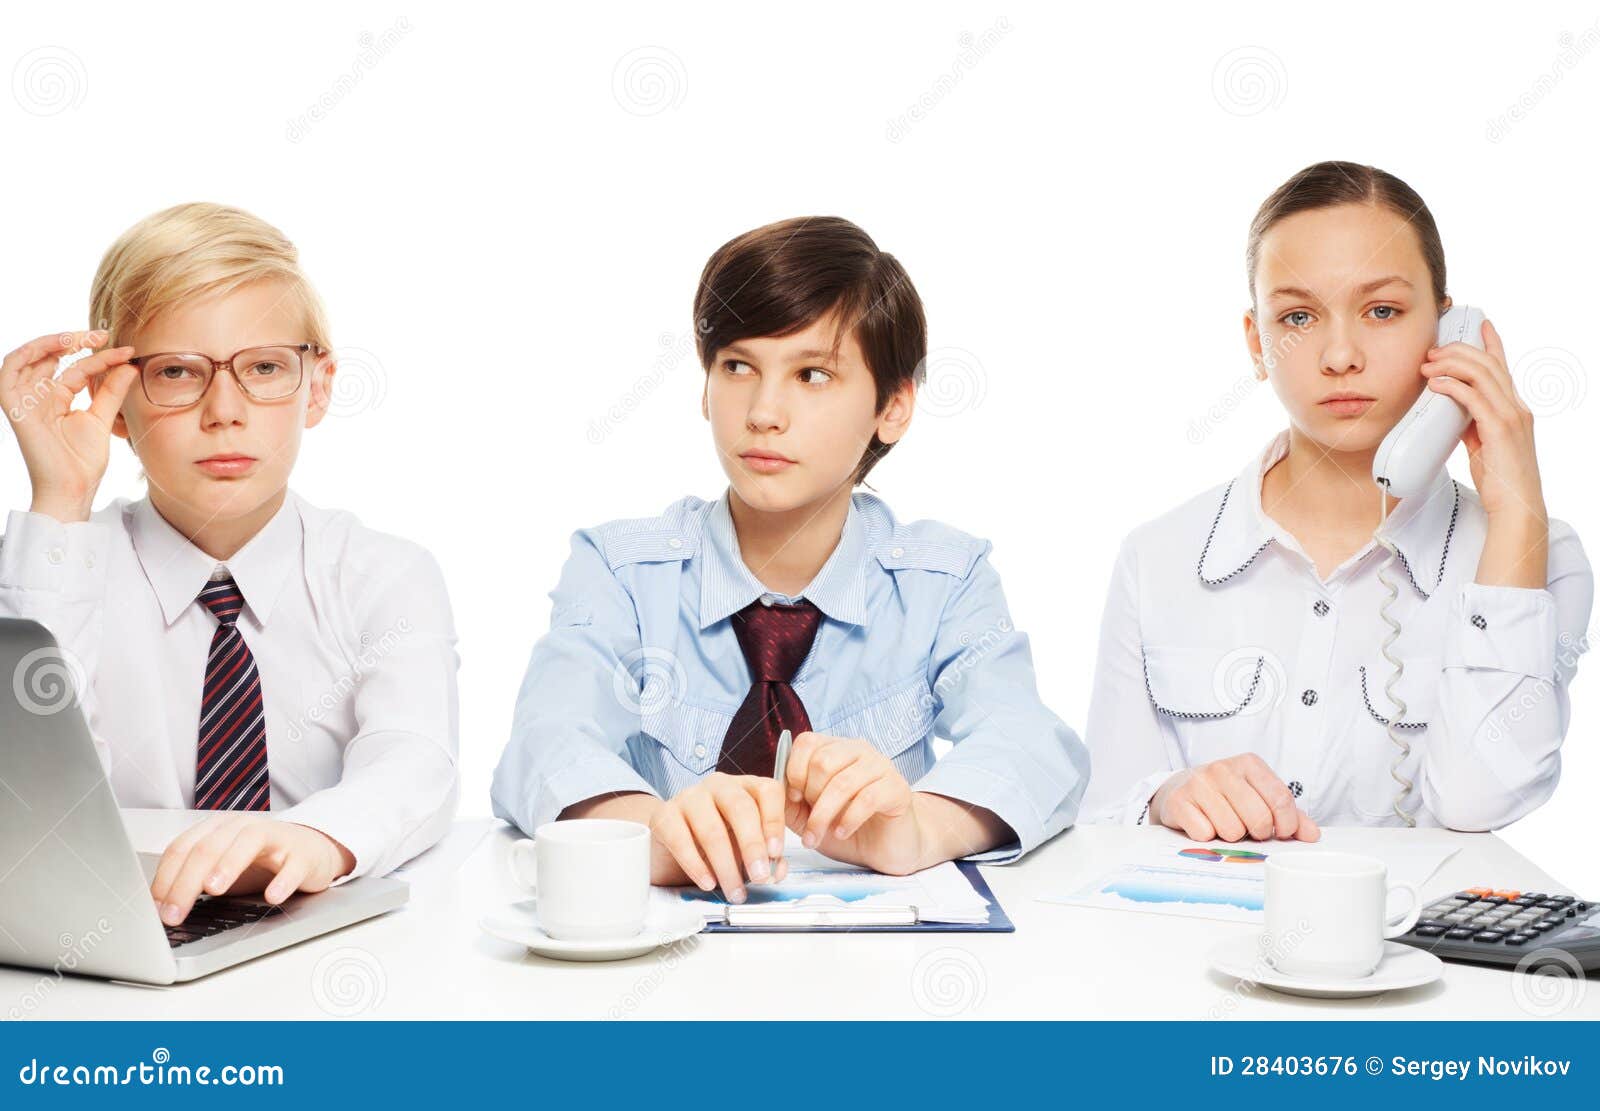 Kids as adults businessman stock photo. Image of phone - 28403676